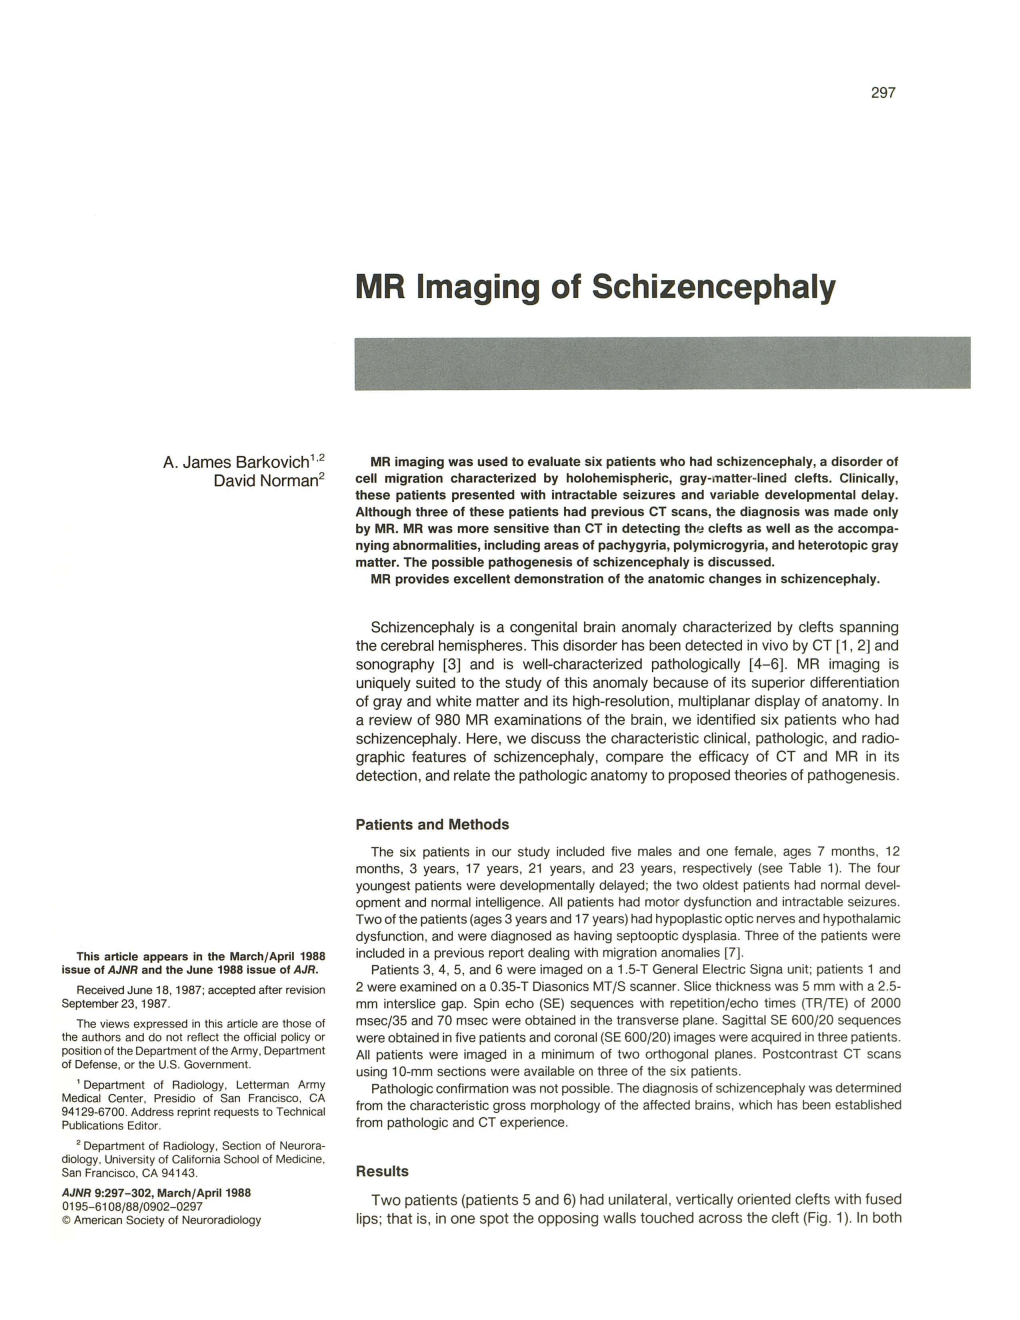 MR Imaging of Schizencephaly